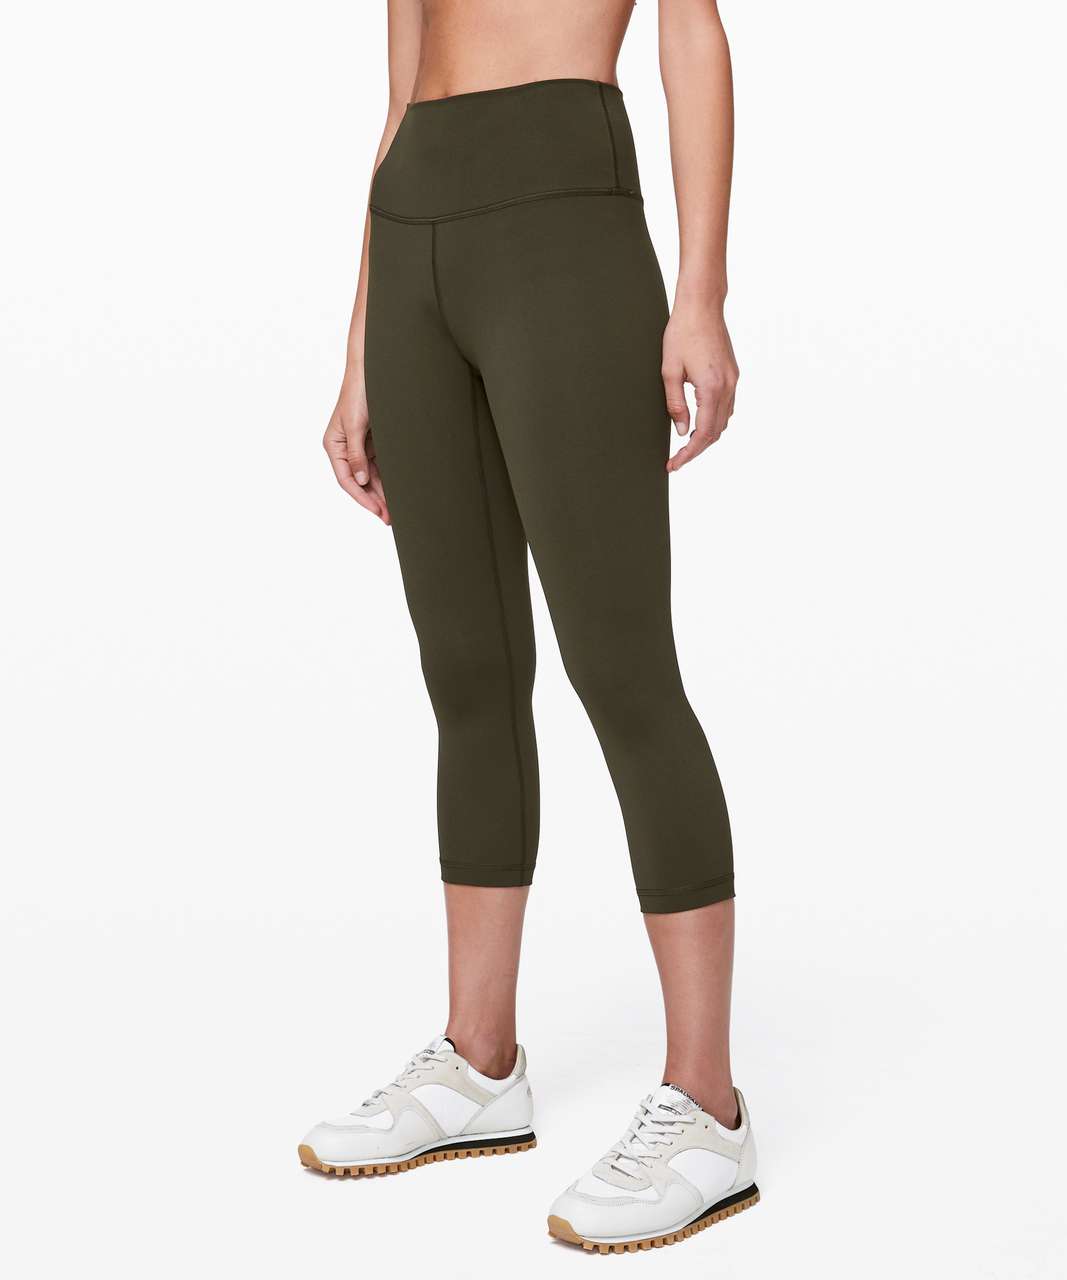 What Is Lululemon Full-On Luxtreme? - Playbite